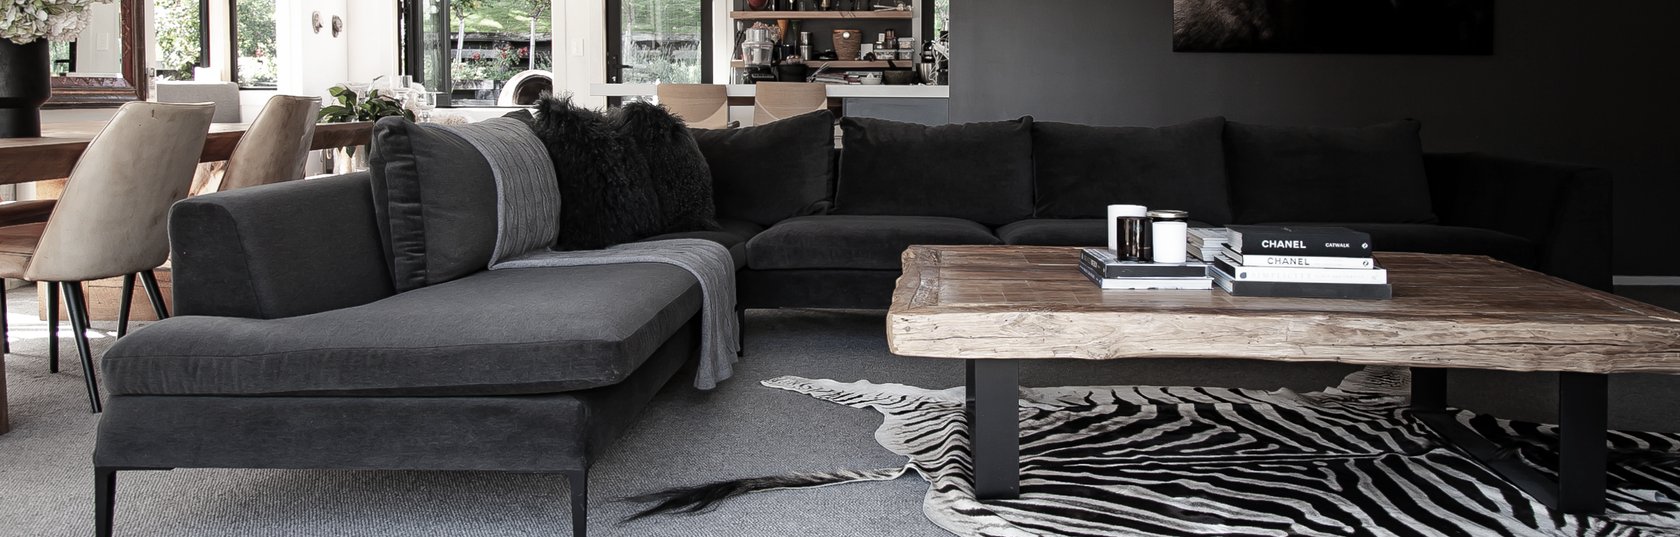 BONZ and its successful pivot to home furnishing